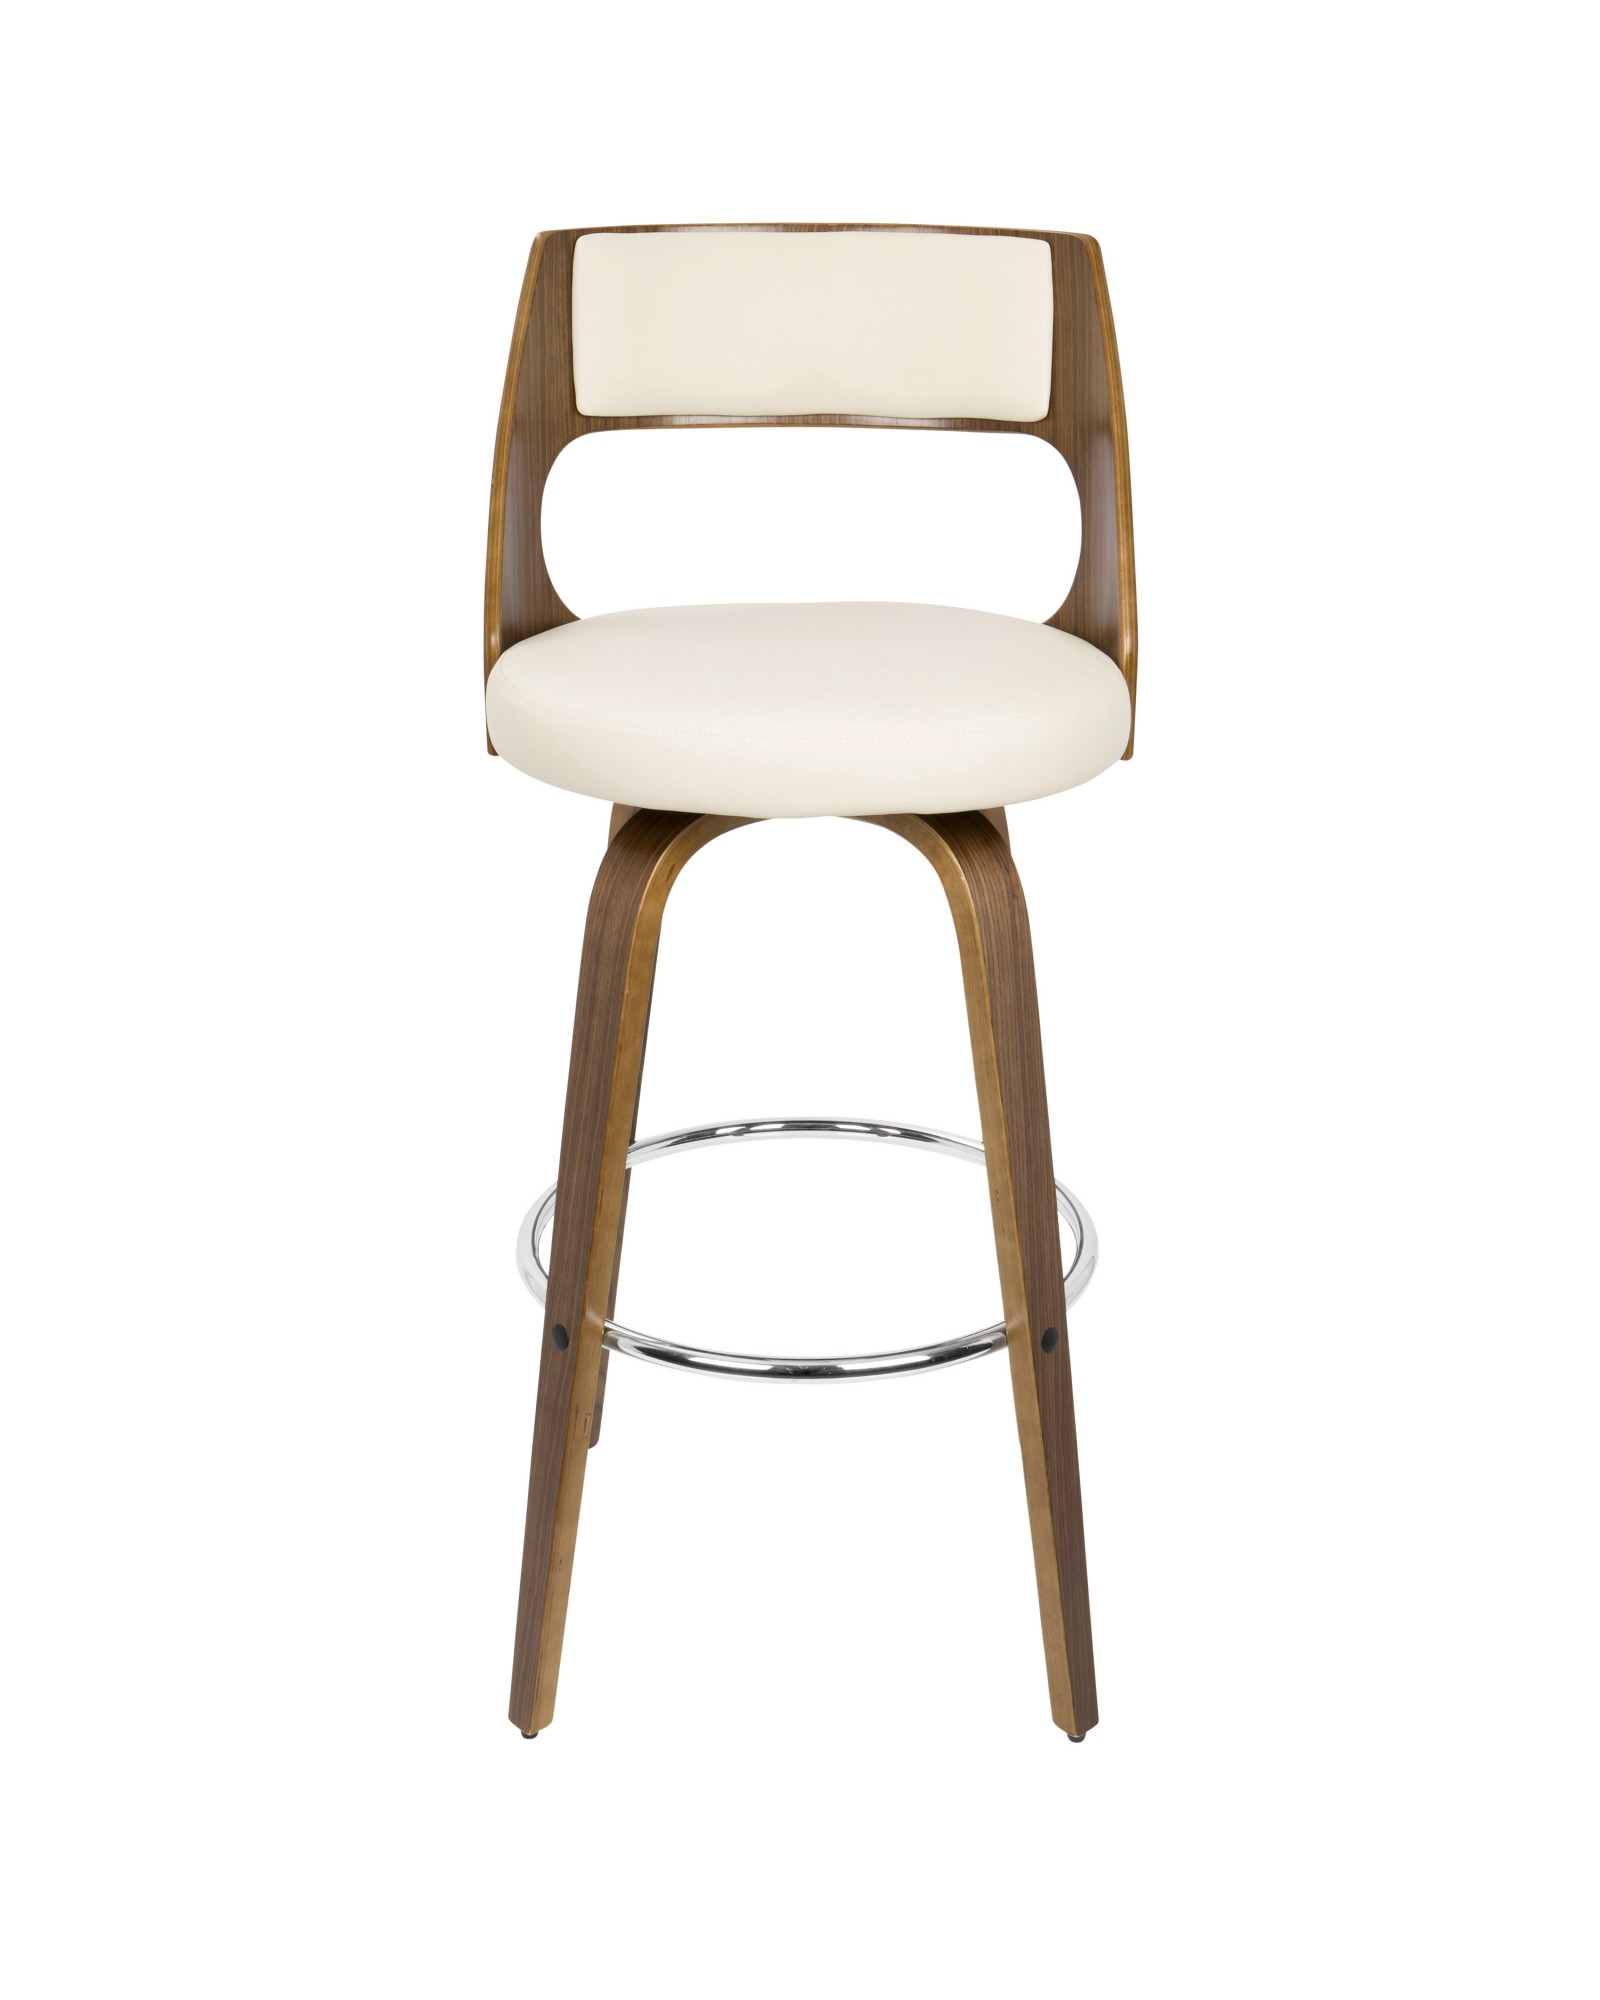 Cecina Mid-Century Modern Barstool with Swivel in Walnut and Cream Faux Leather